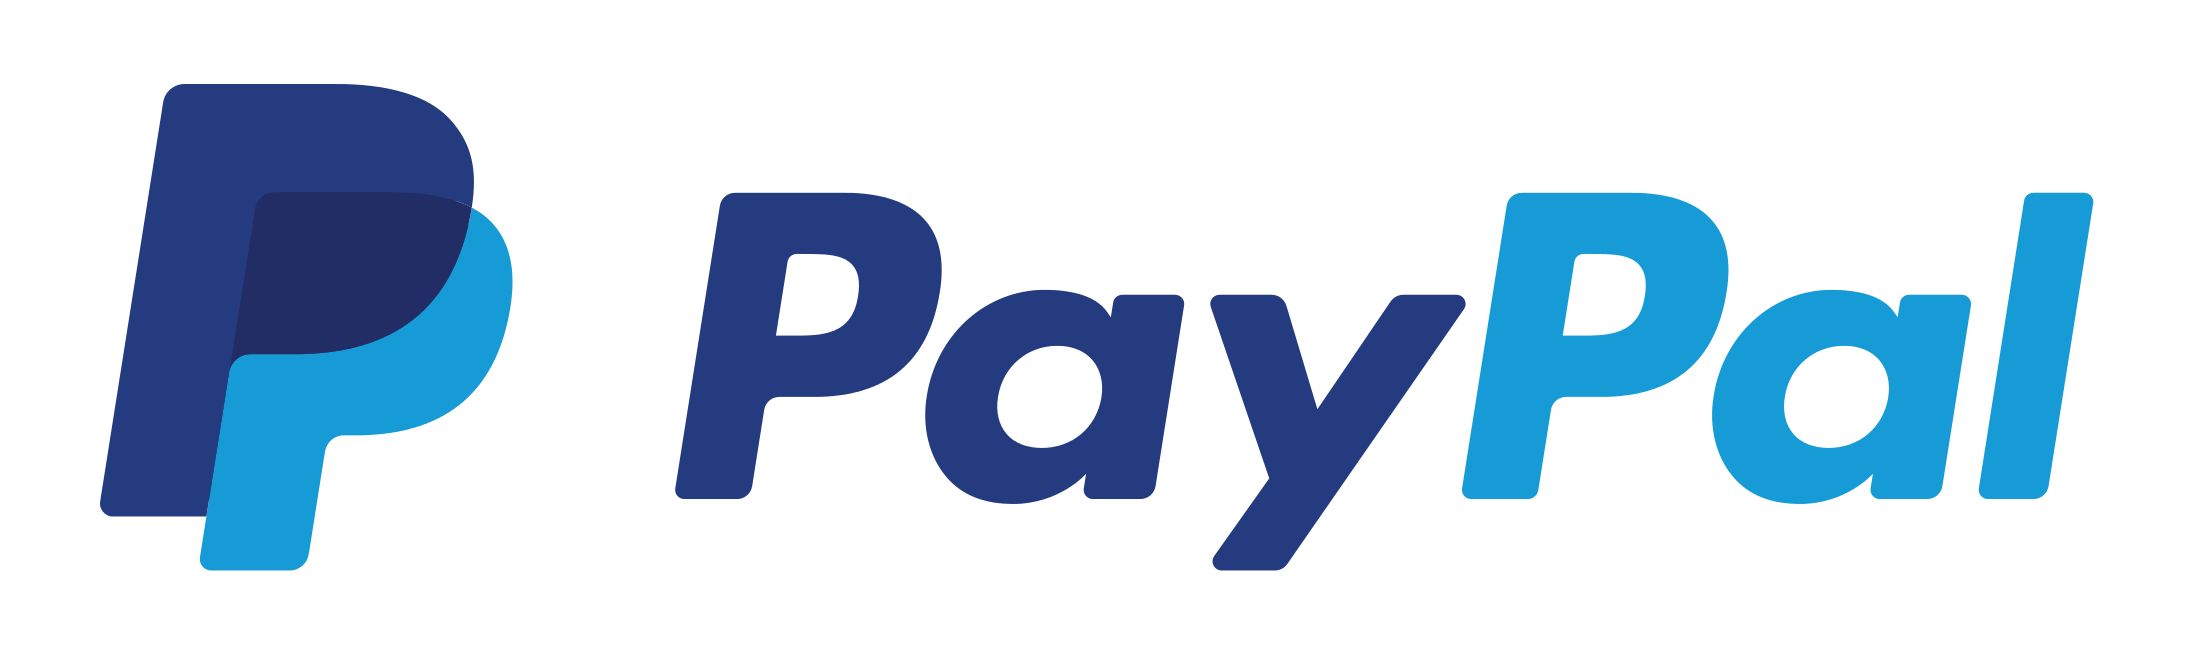 Meaning Paypal logo and symbol | history and evolution